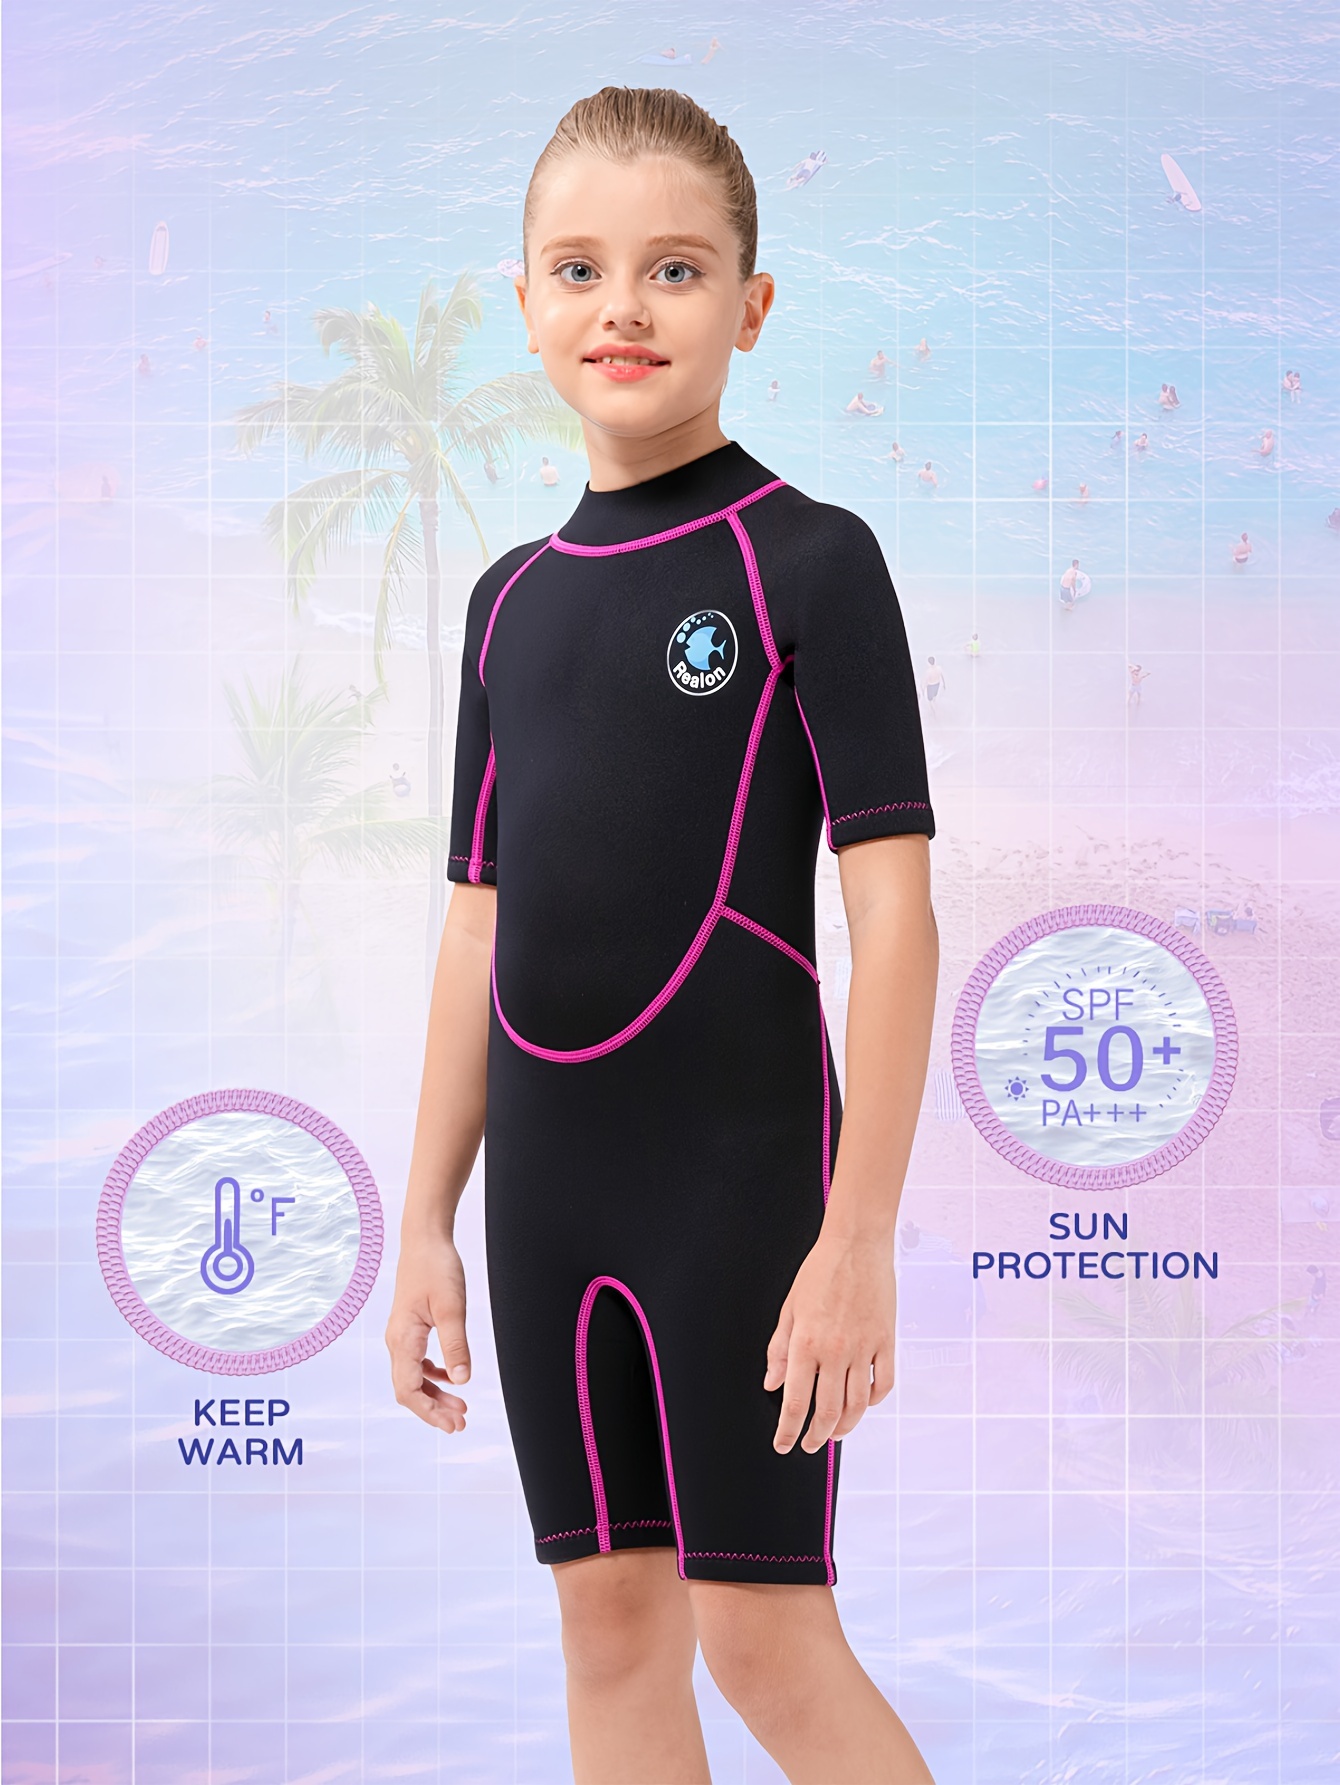 REALON Kids Wetsuit Top Jacket for Boys Girls Toddler Youth